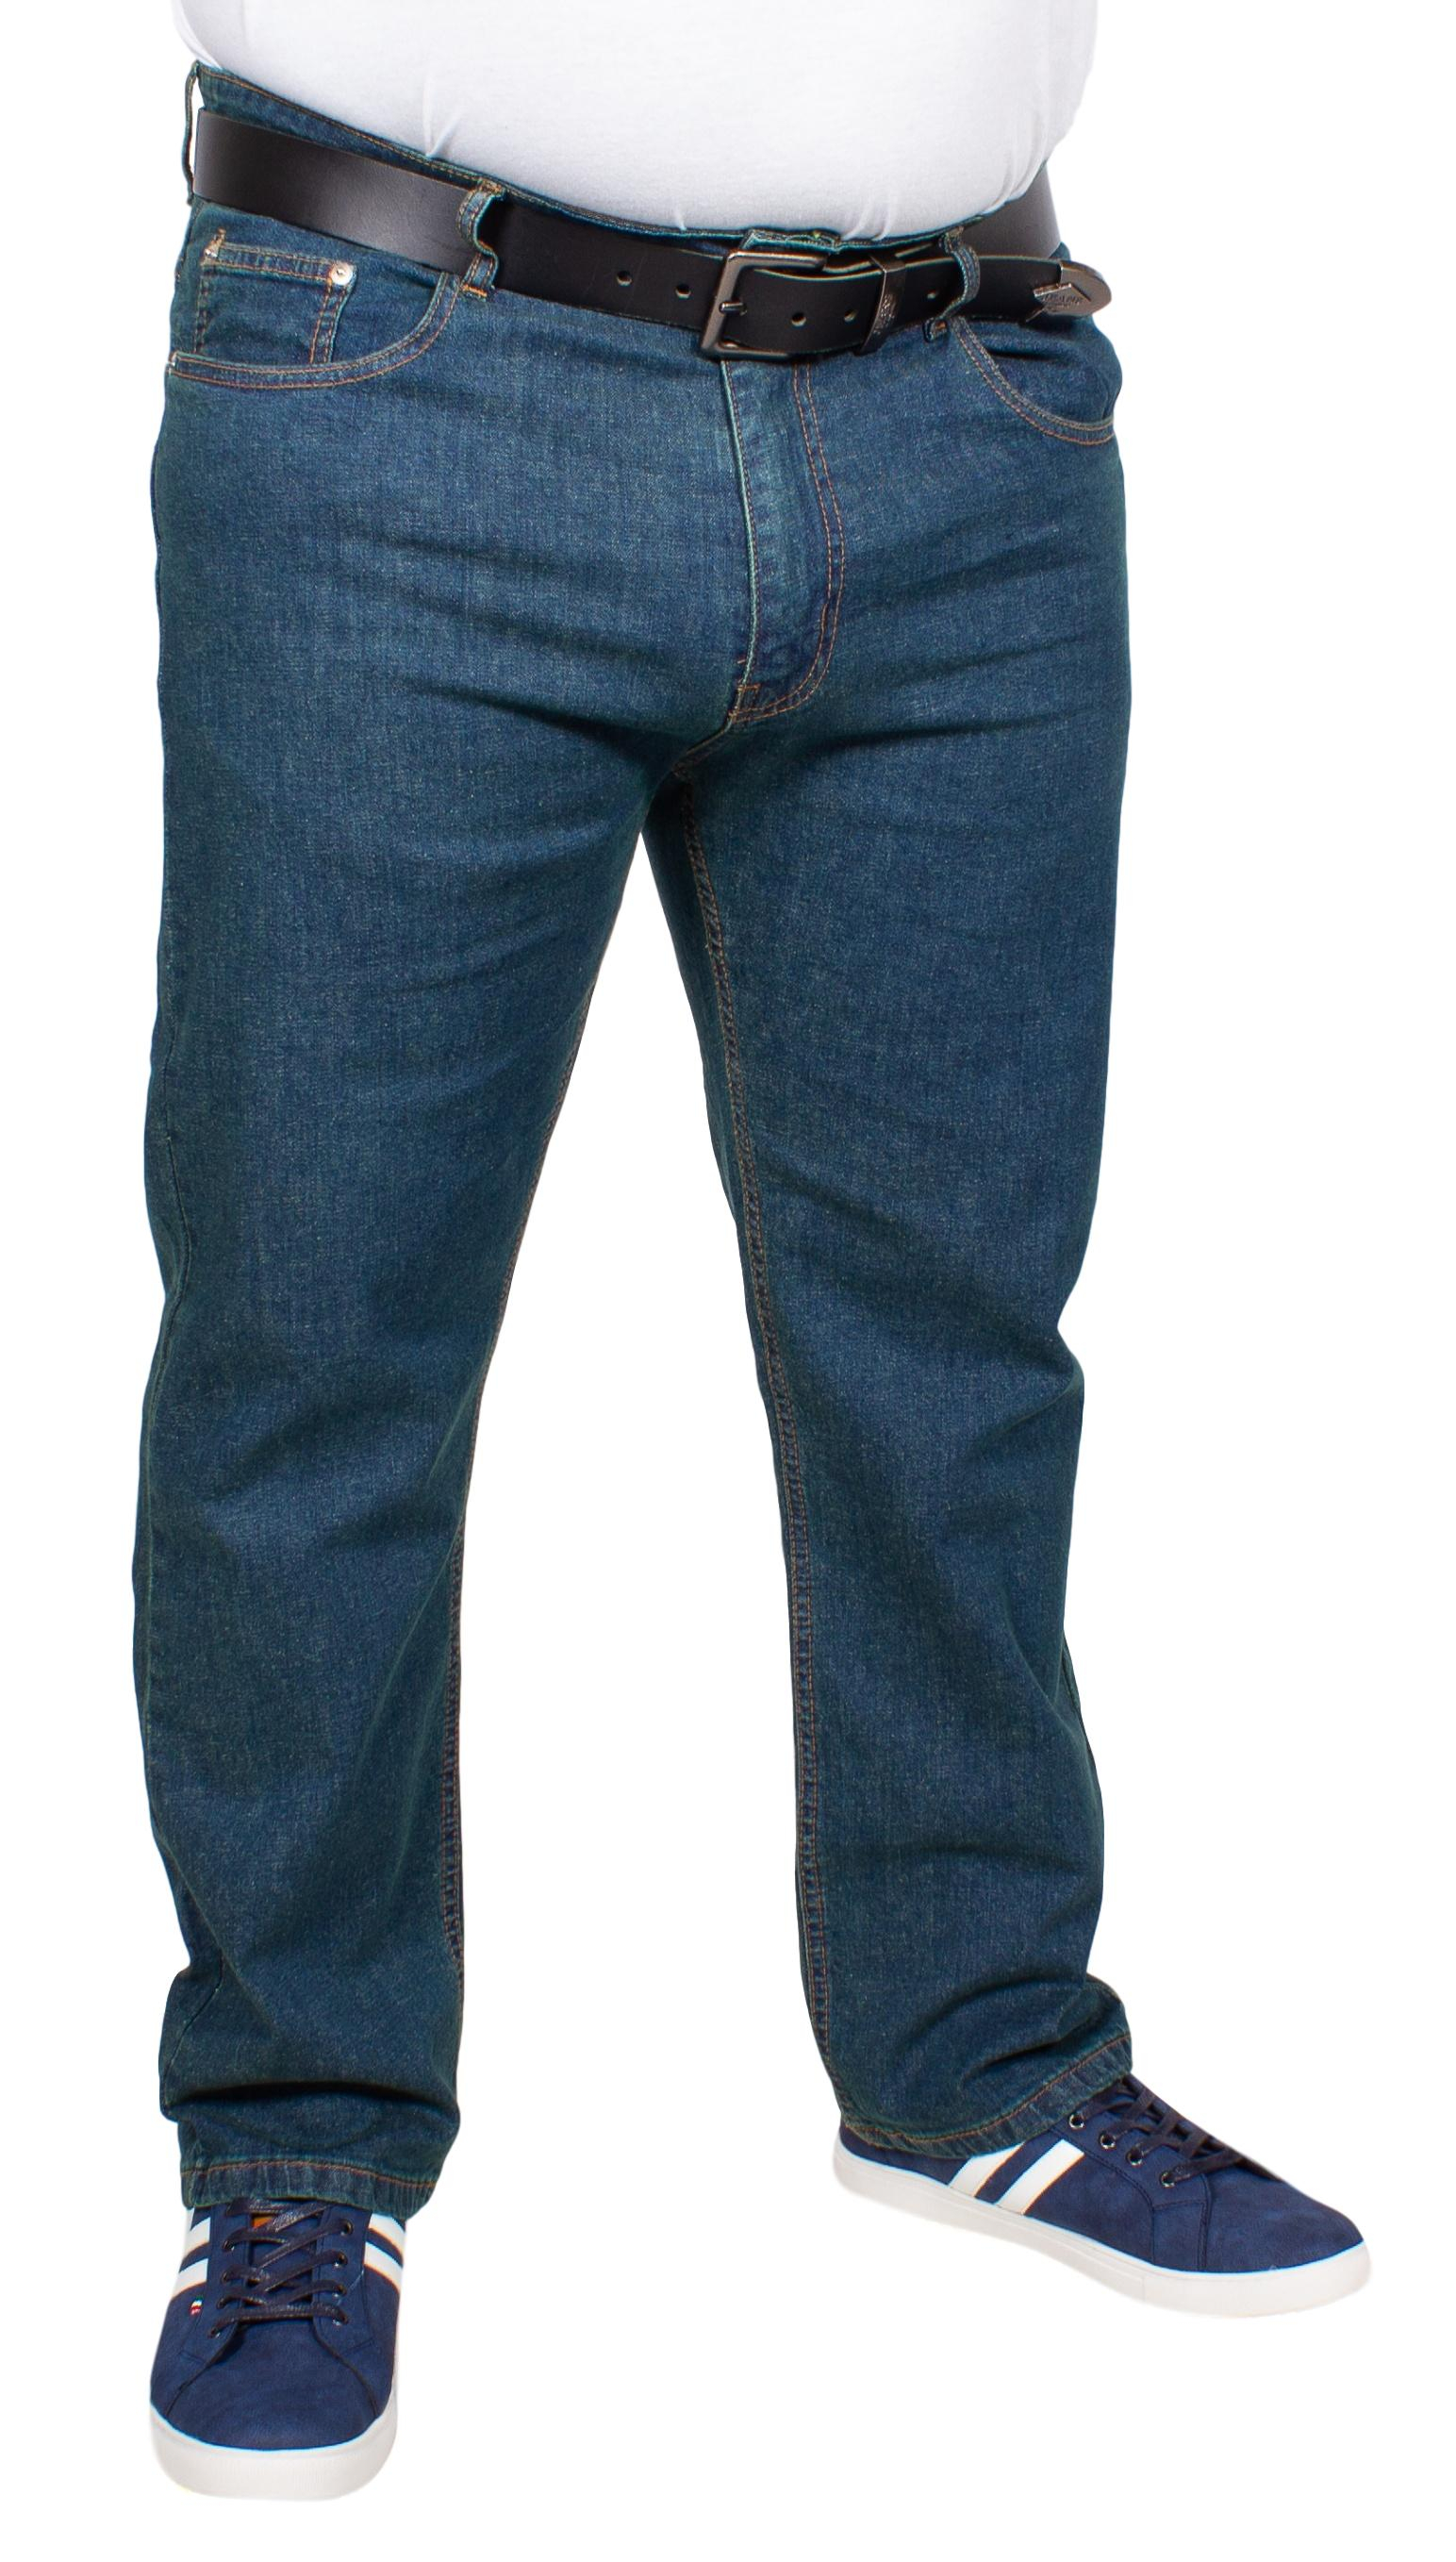 low rise jeans for fat guys